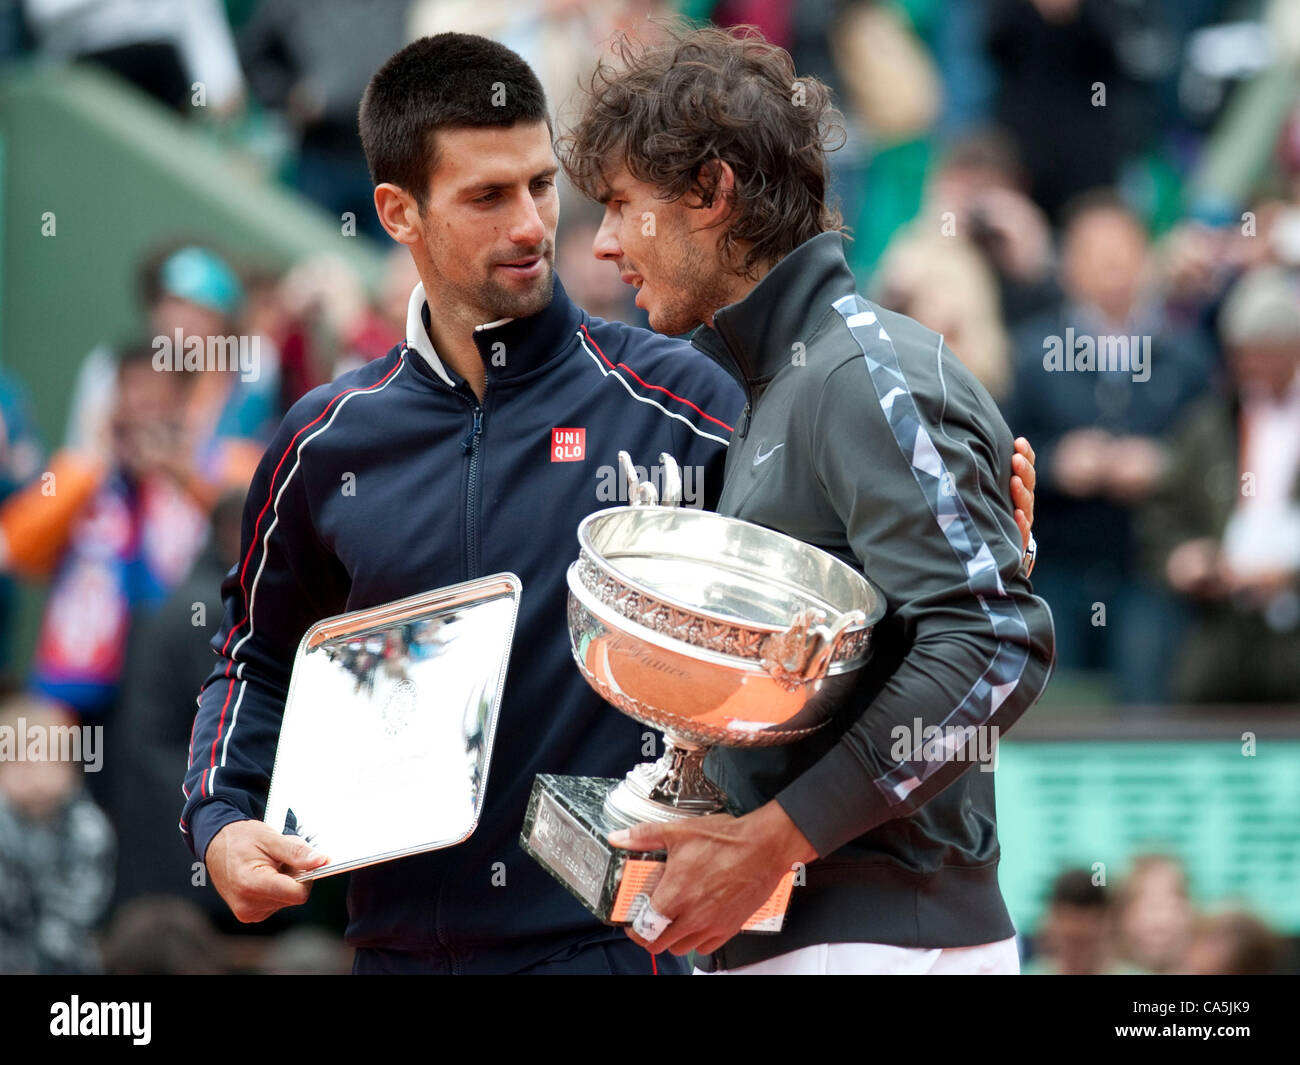 11.06.2012. Roland garros, Paris, France. Novak Djokovic of Serbia and  Rafael Nadal of Spain have a private word during the trophy presentation  ceremony after Nadal defeated Serbia's Novak Djokovic in the final